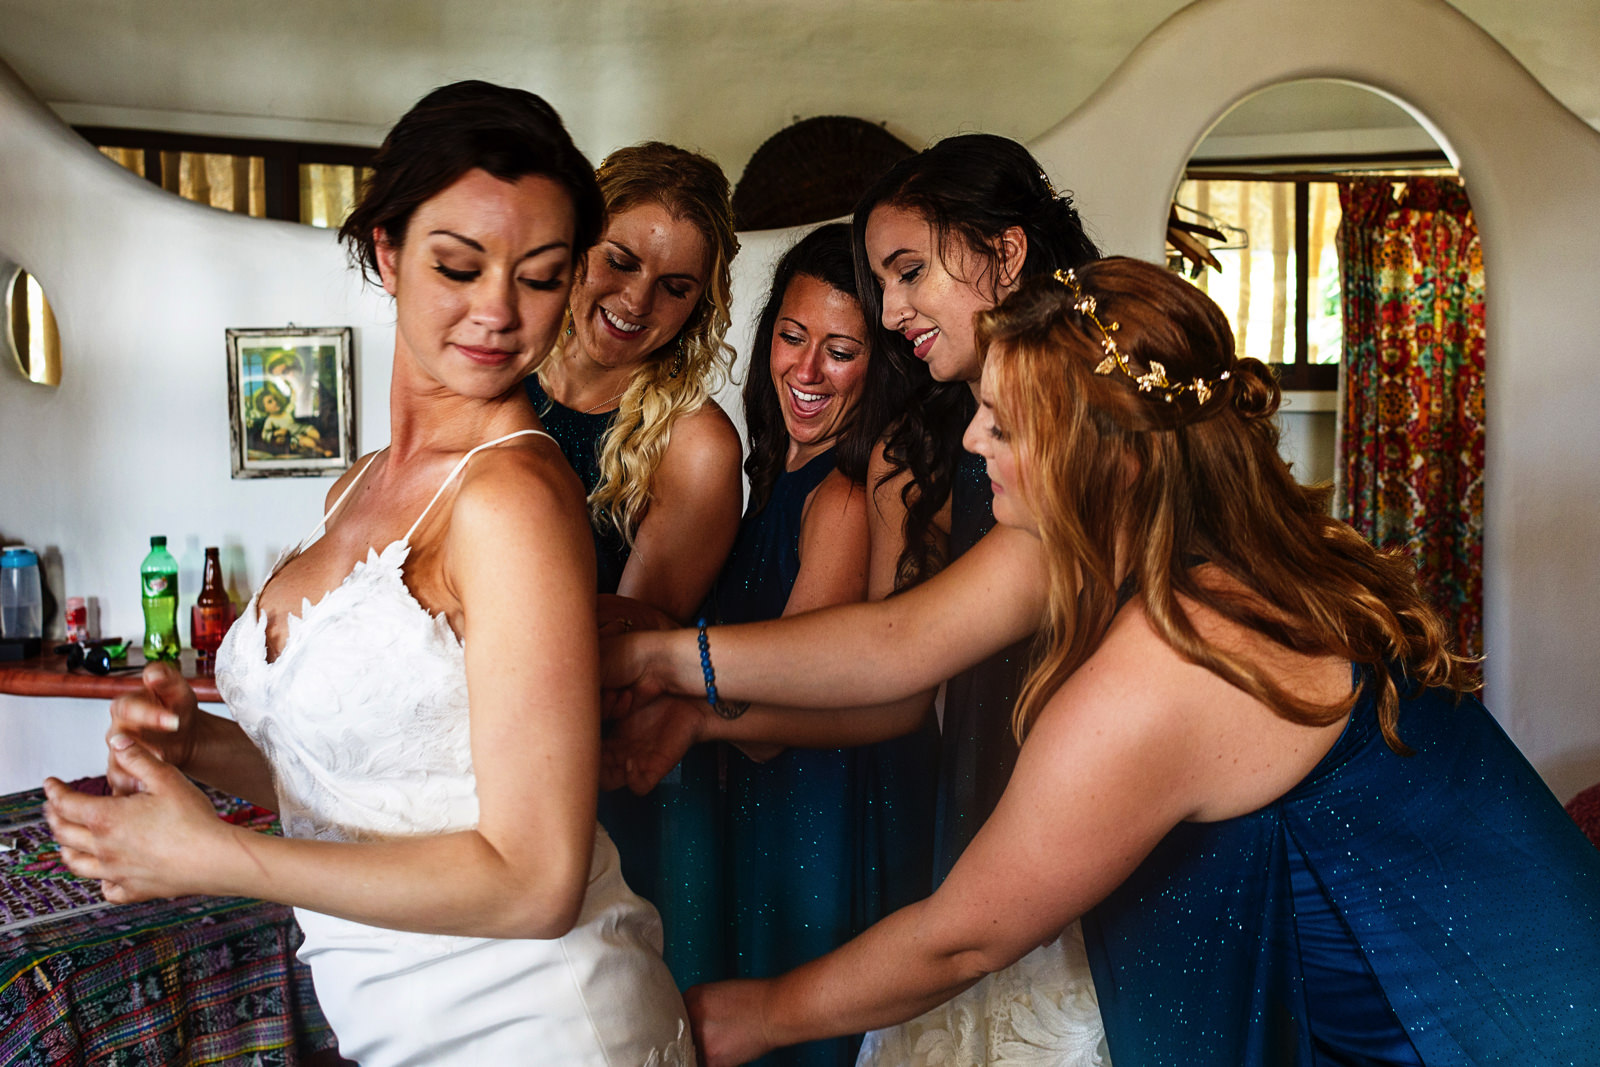 All bridesmaids helping the bride with the wedding dress